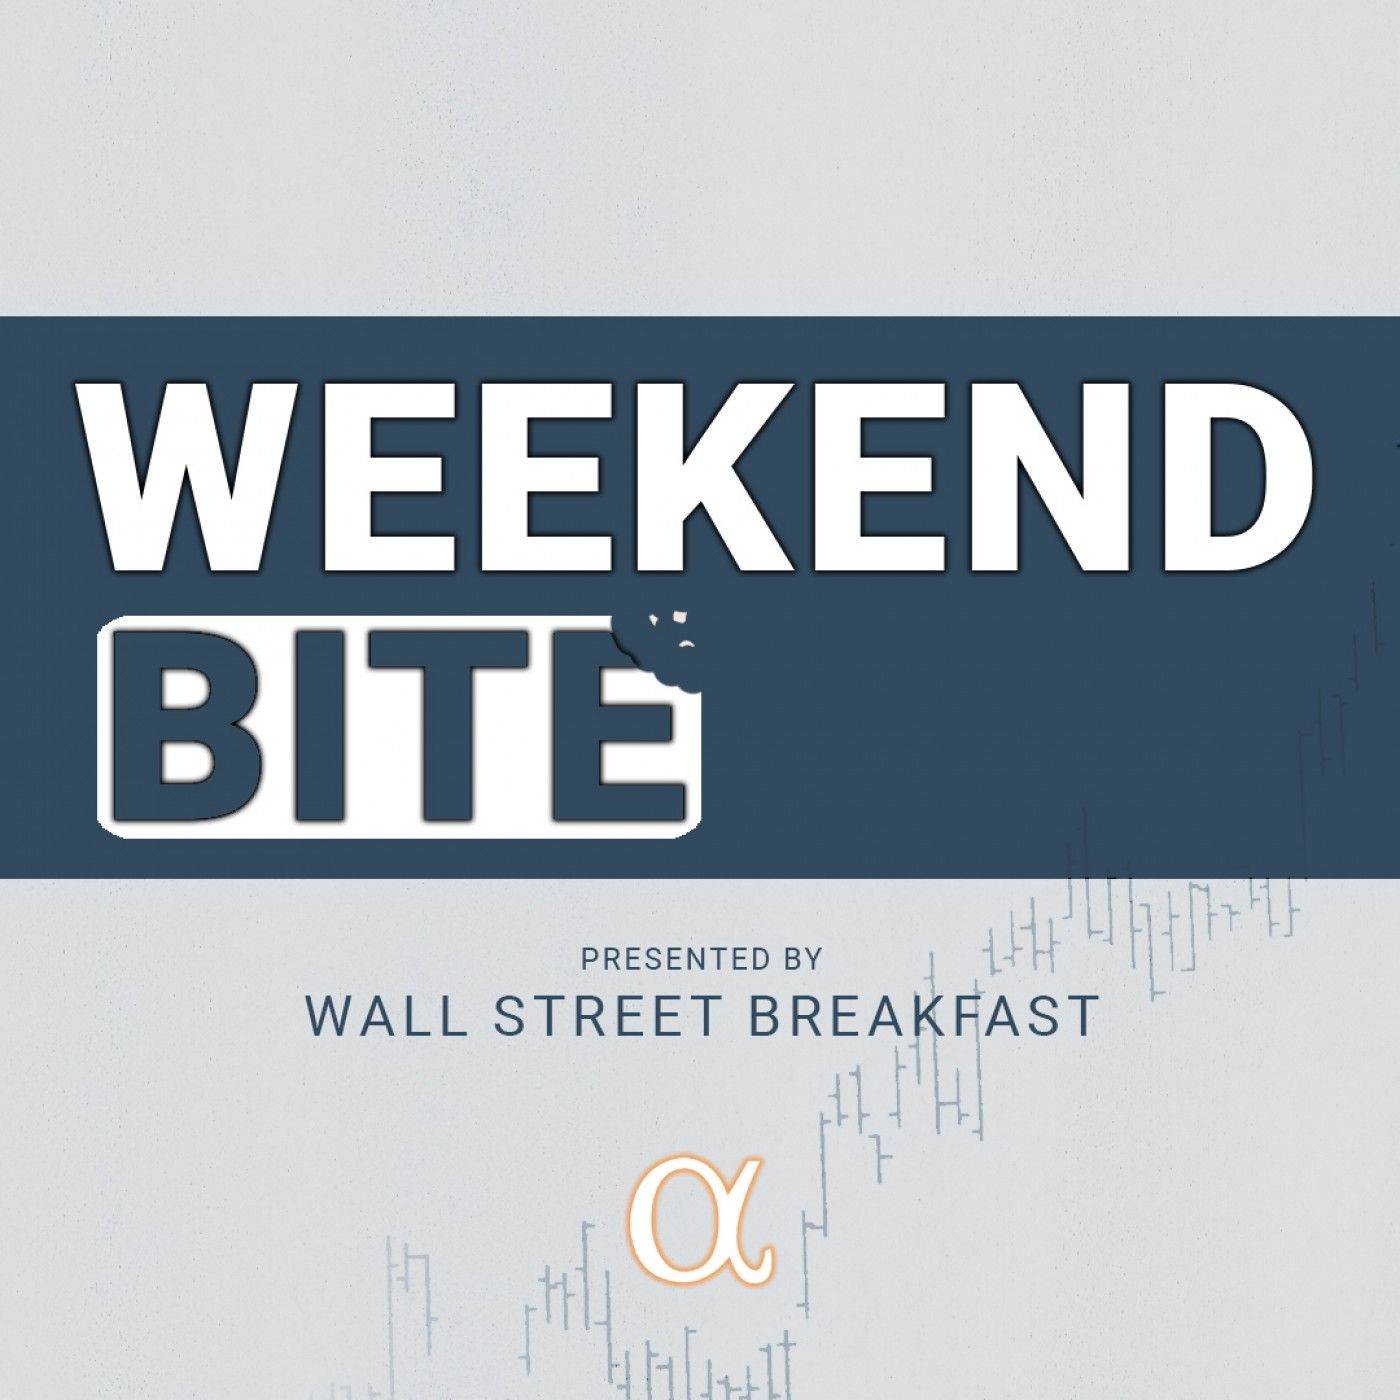 WSB’s Weekend Bite: Eric Basmajian Breaks Down CPI And What’s To Come For Markets